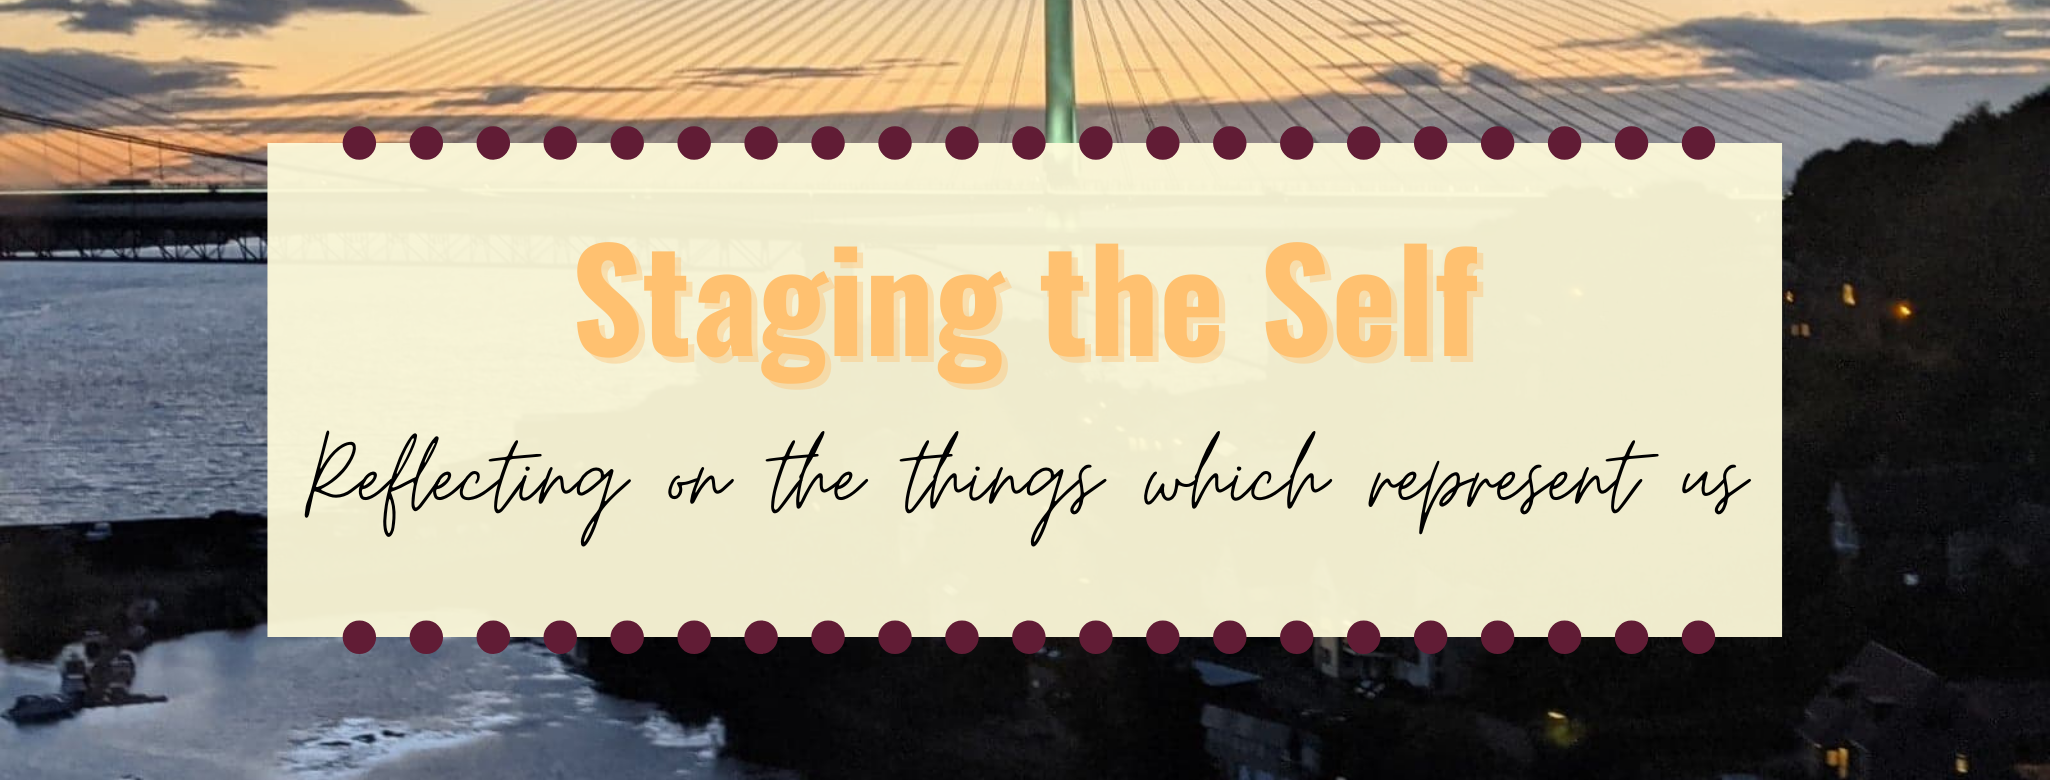 Banner for "Staging the Self" blog post